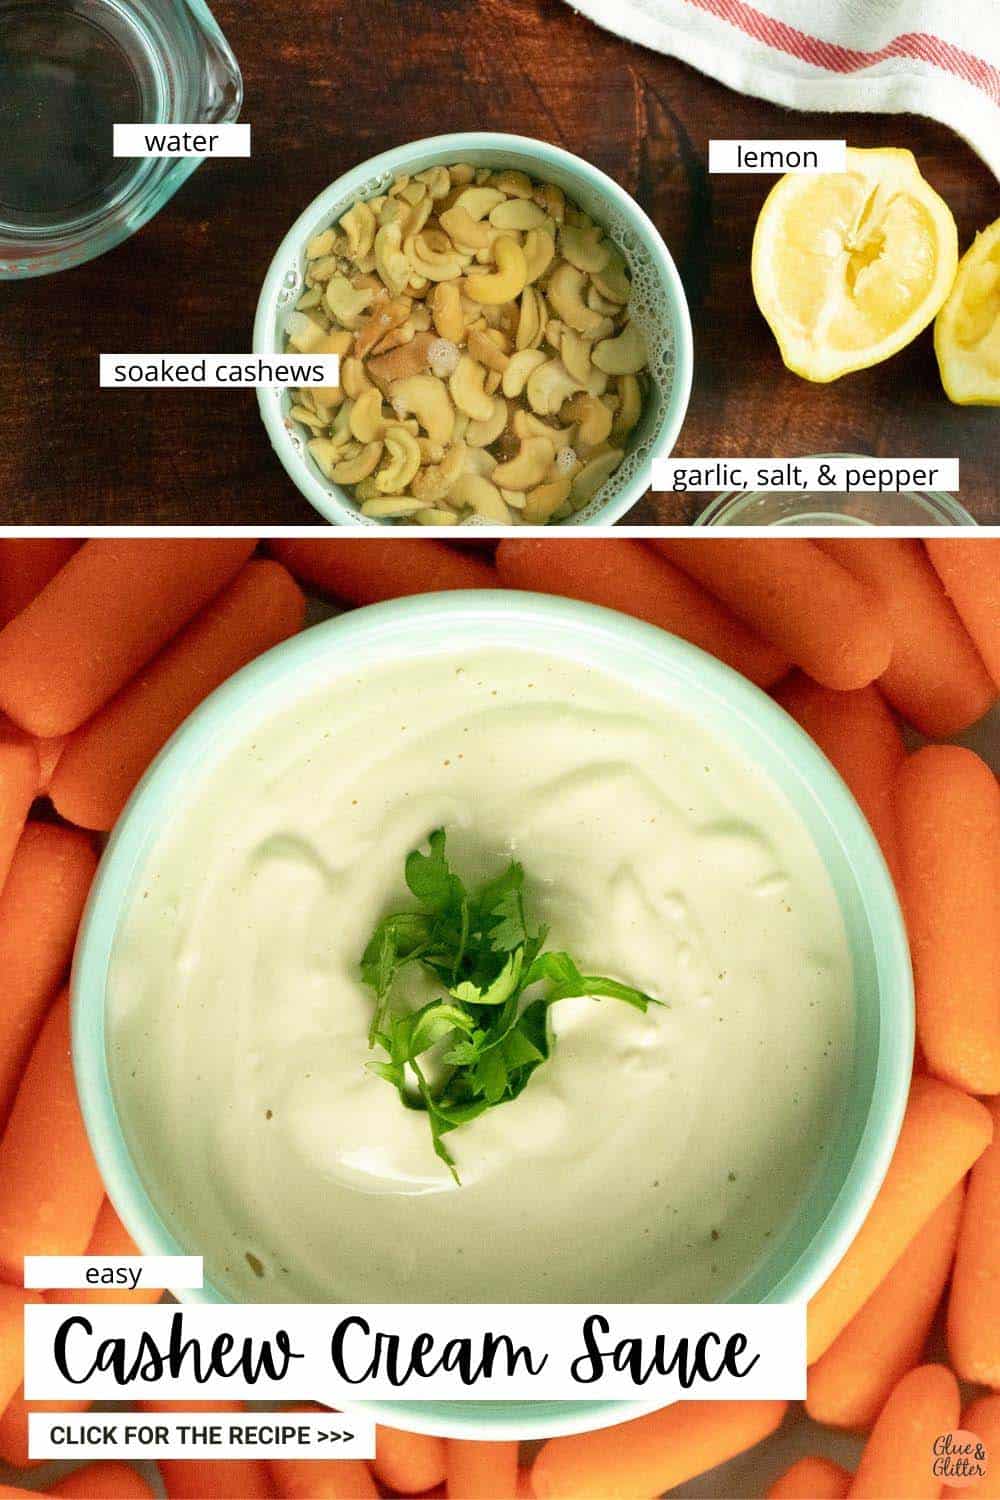 image collage of cashew cream ingredients and a bowl of the finished cashew cream